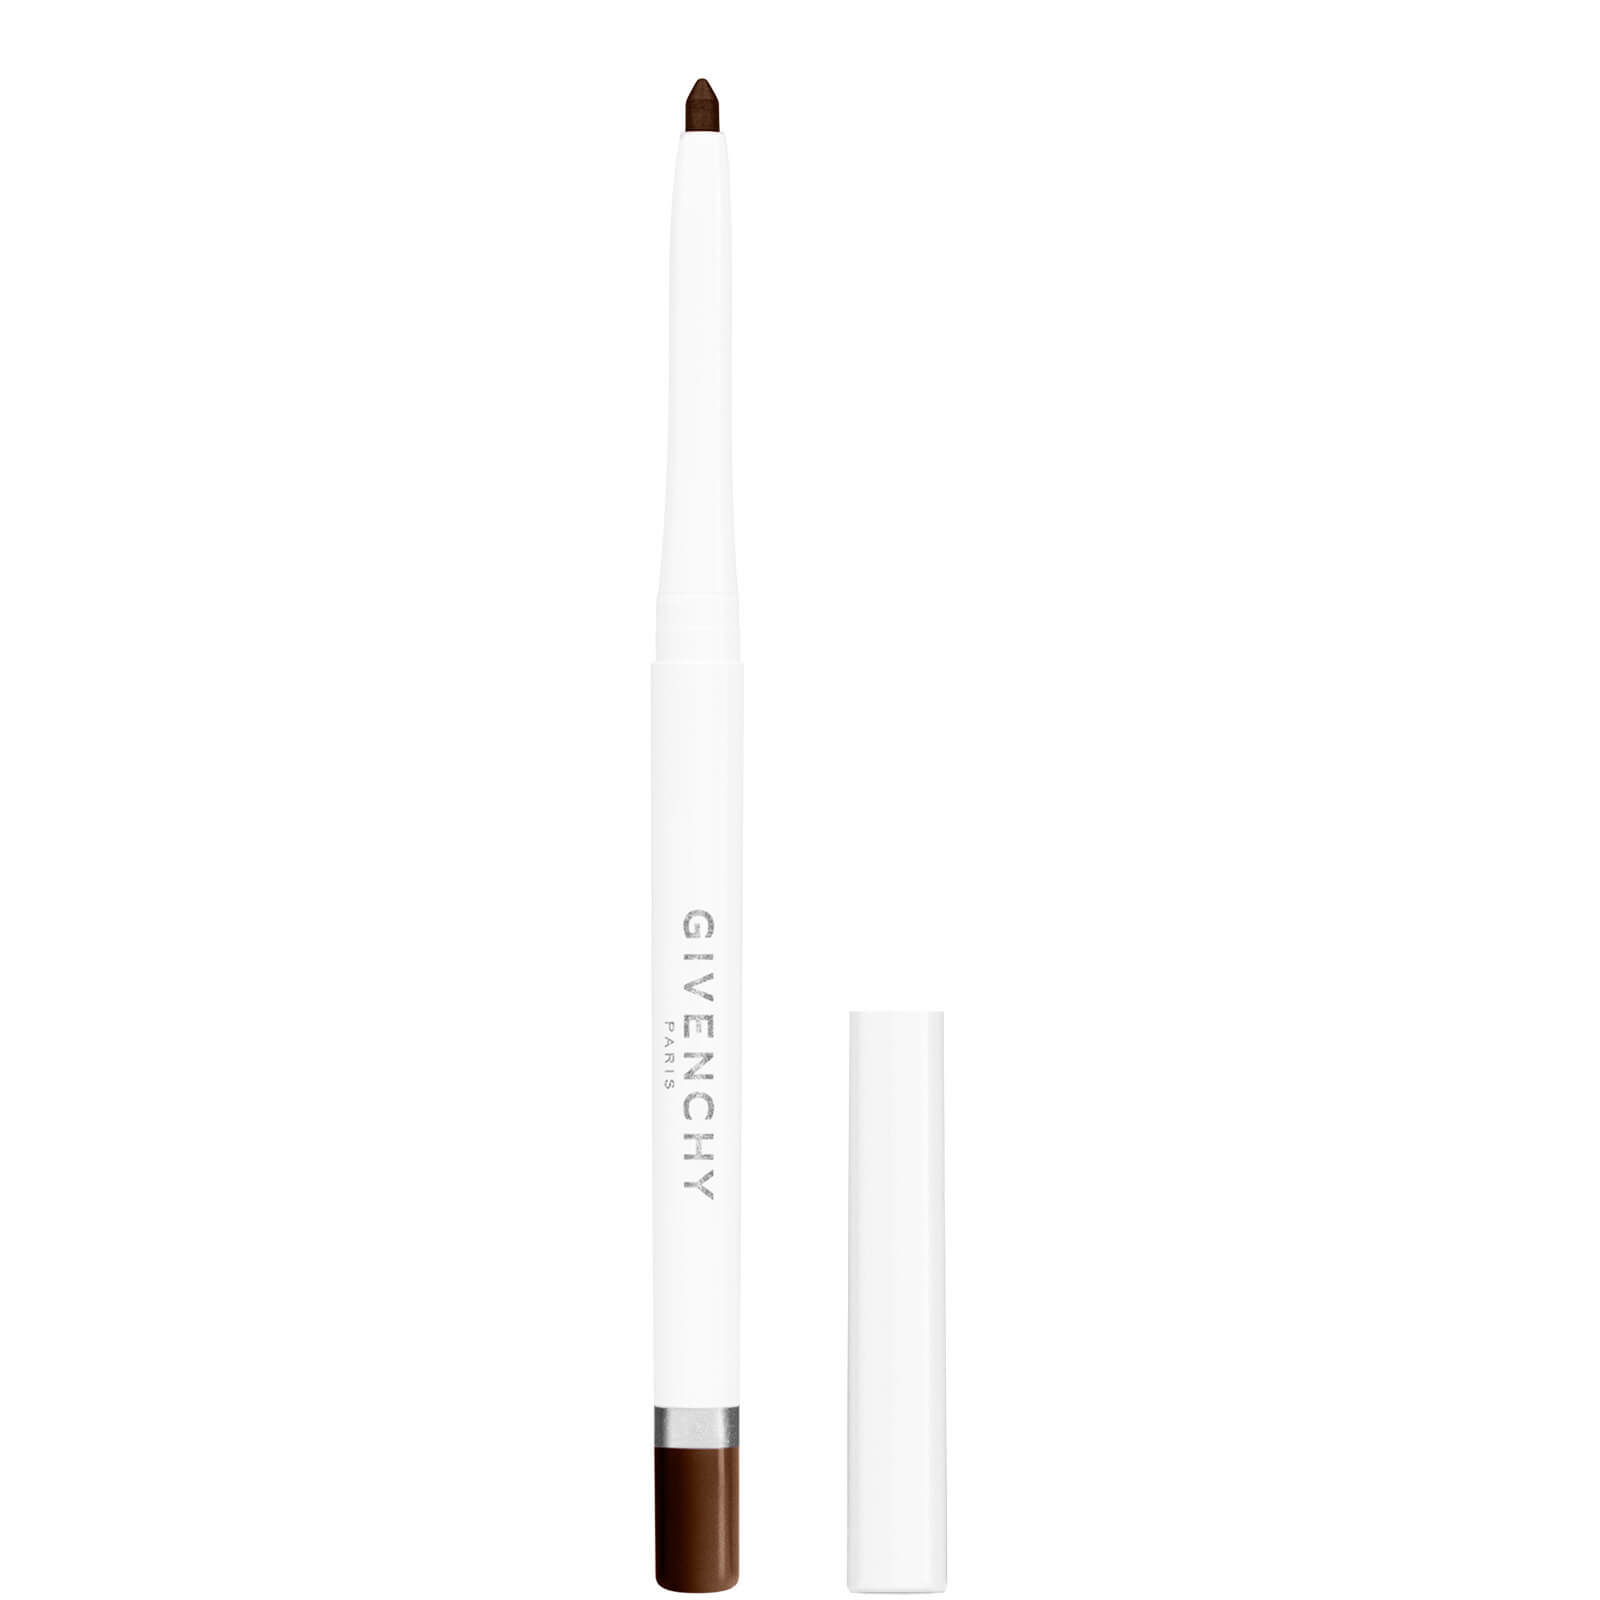 Givenchy Khol Couture Waterproof Eyeliner 10g (Various Shades) - Chestnut